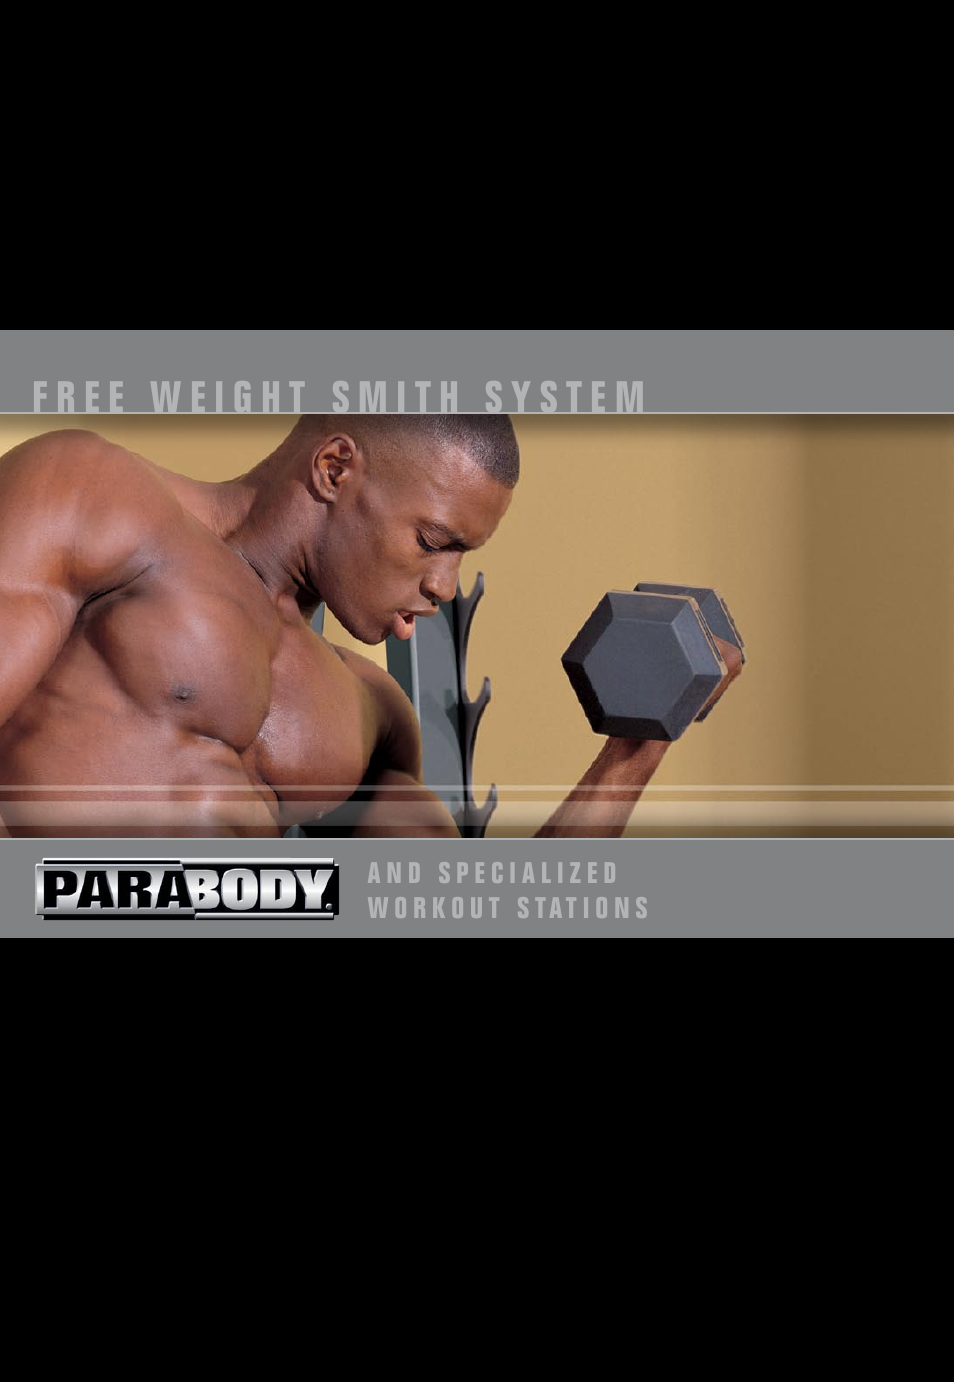 Free Weight Smith System